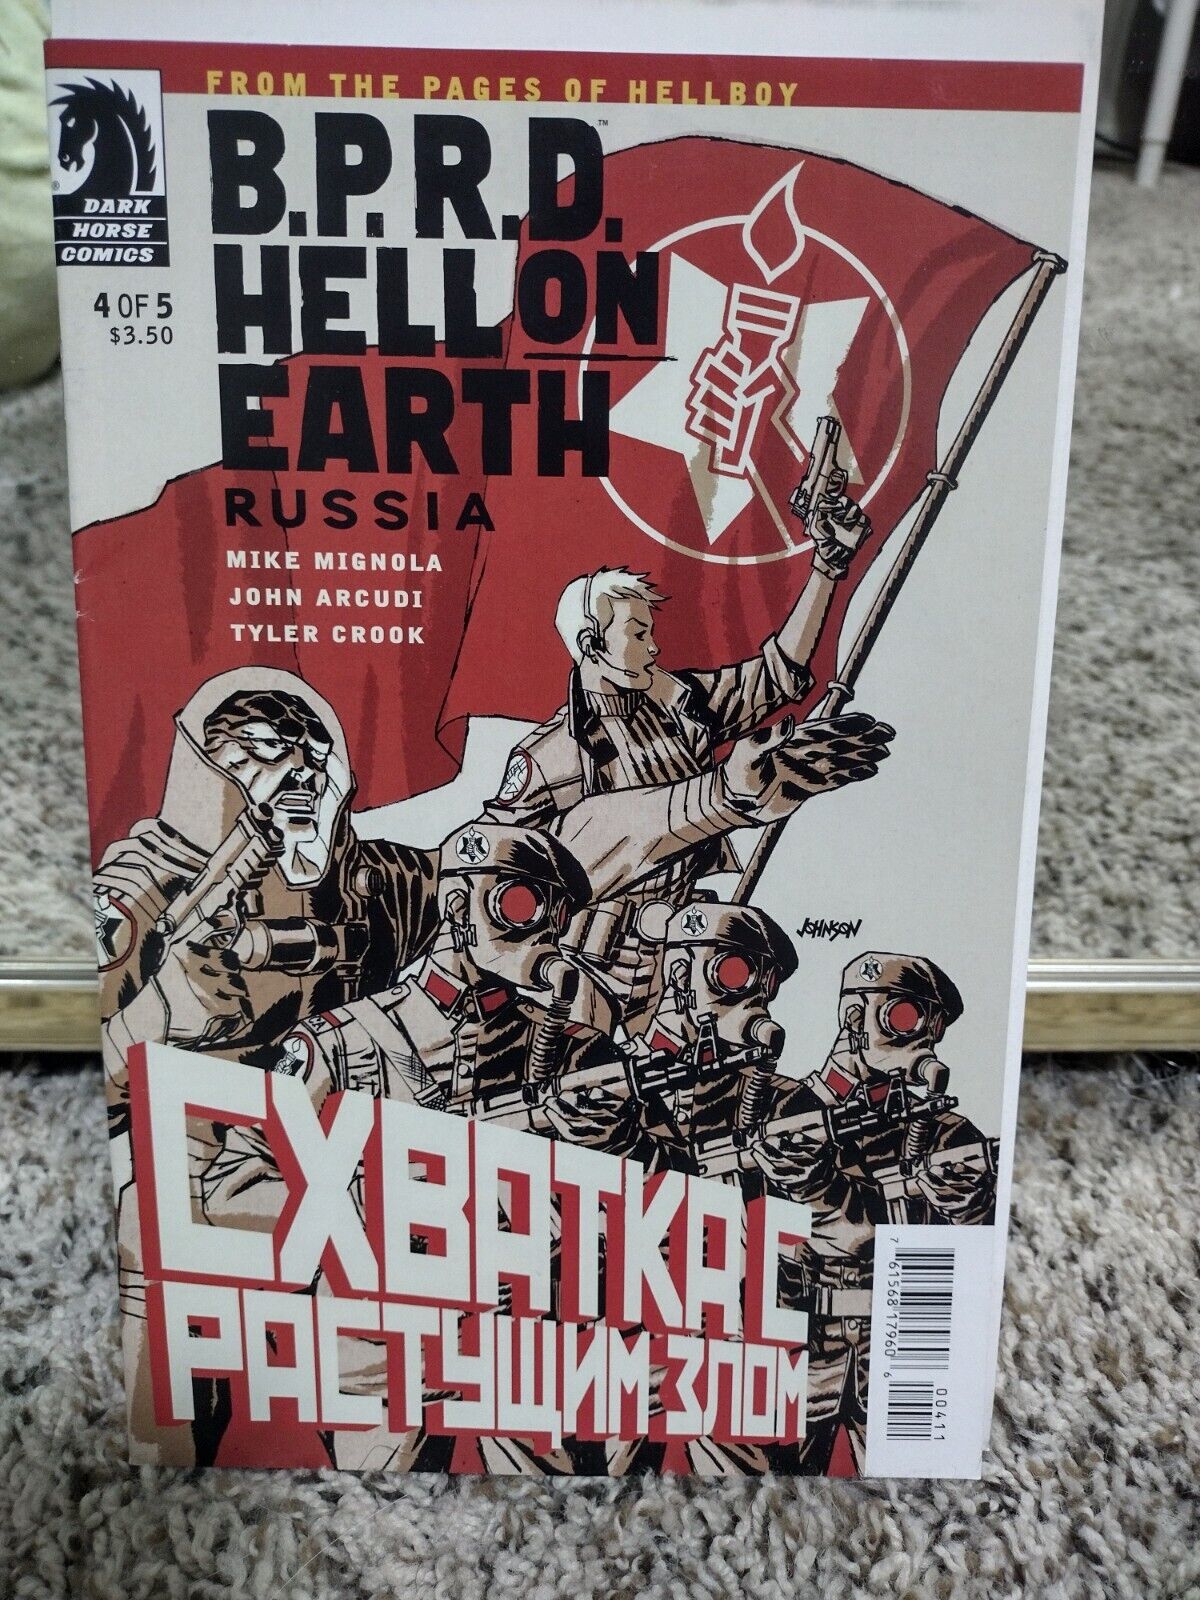 B.P.R.D. Hell on Earth Russia #4 (Dark Horse) 2011 Very Fine